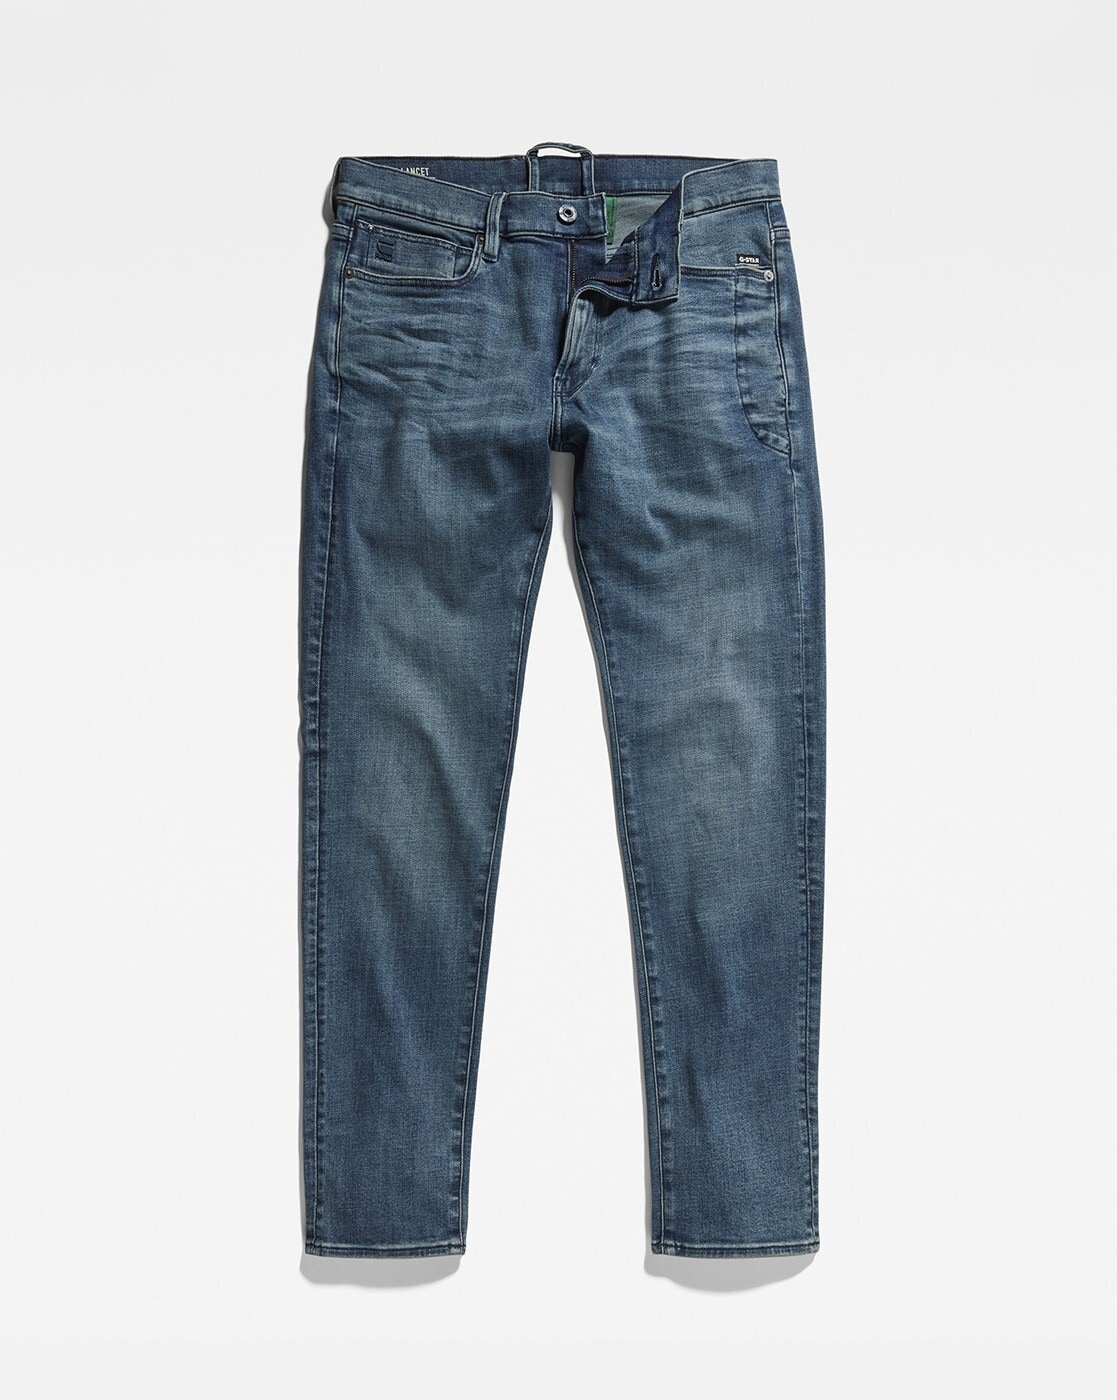 J Brand Jeans Men's Jeans, Thrashed Grain Seed, 36: Buy Online at Best  Price in Egypt - Souq is now